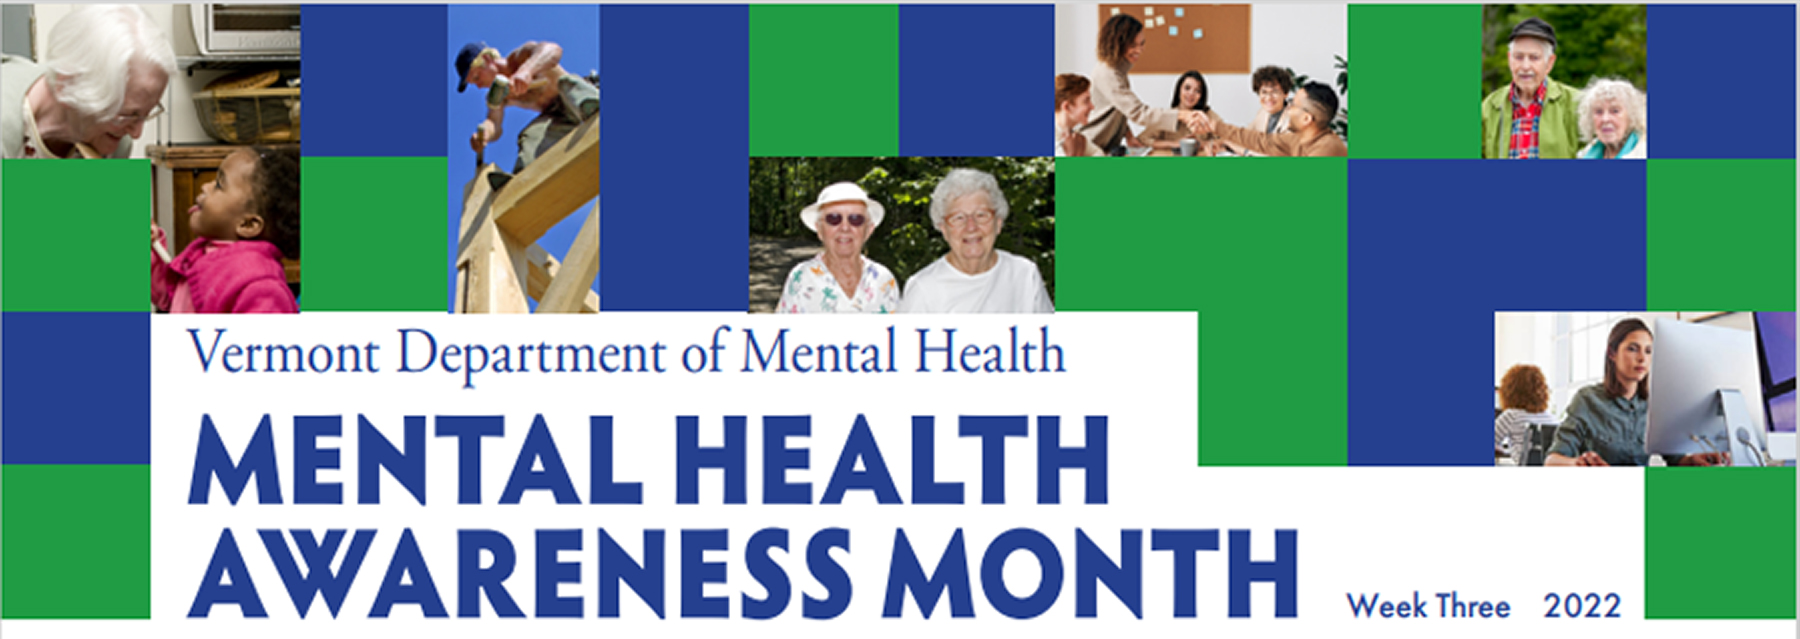 Vermont Department of Mental Health's Week Three of Mental Health Awareness Month heading